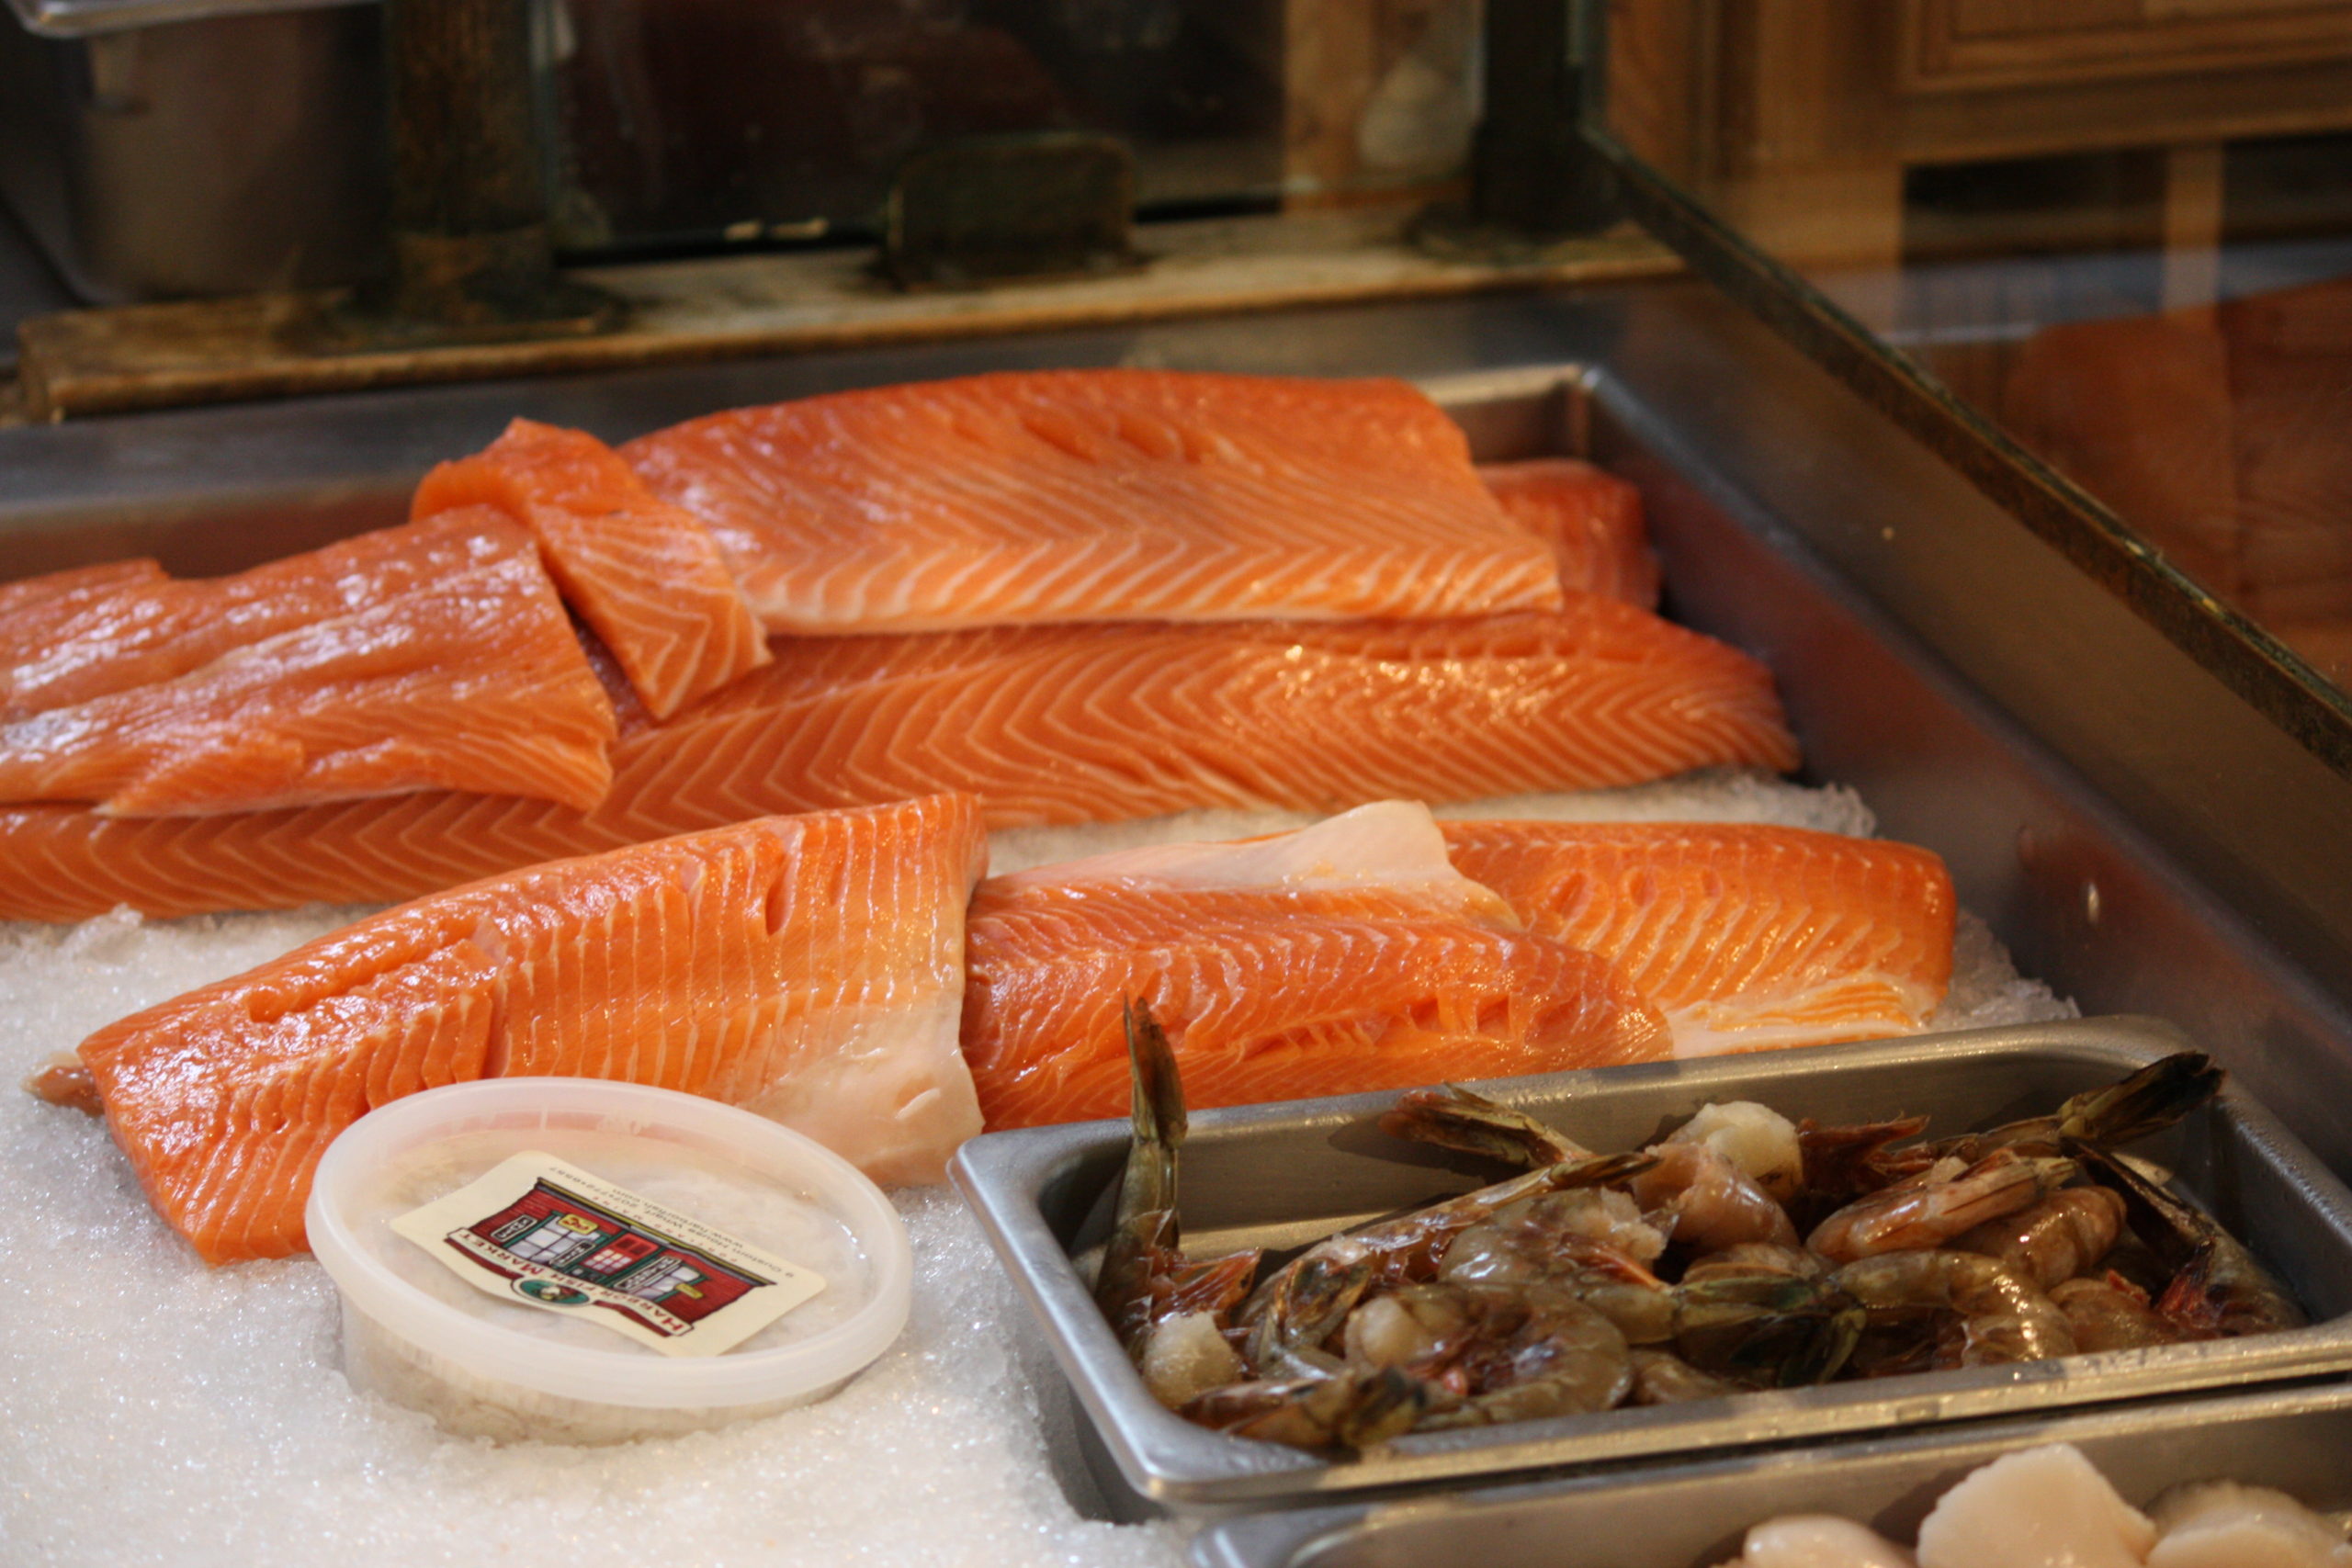 Fresh Seafood in display case from Harbor Fish Market